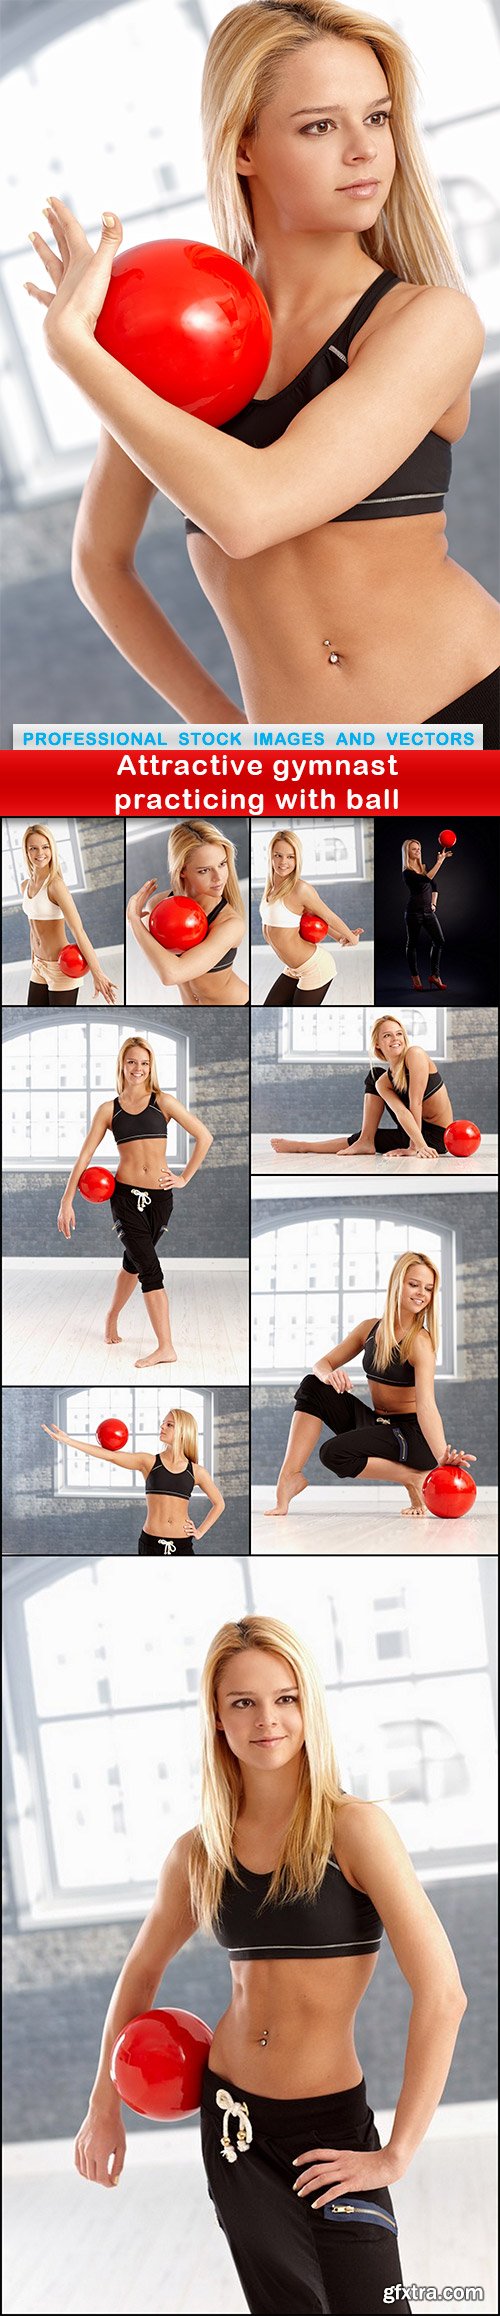 Attractive gymnast practicing with ball - 10 UHQ JPEG